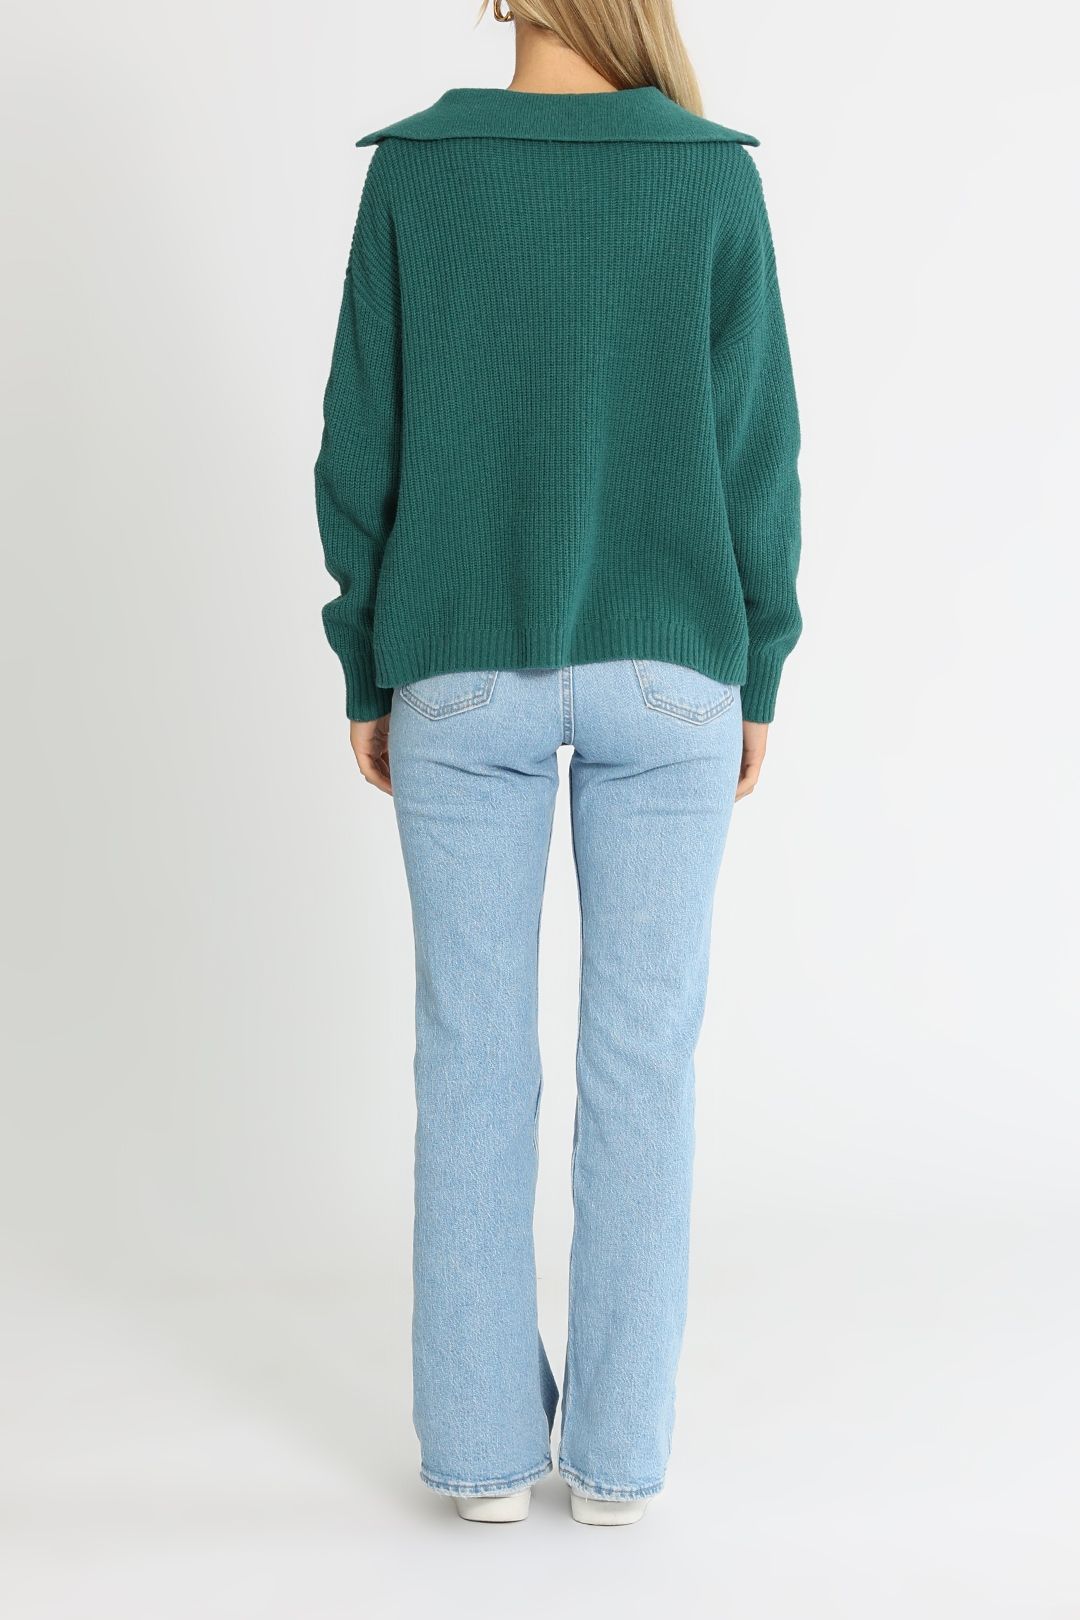 LMND Ava Collared Sweater Sea Relaxed Fit